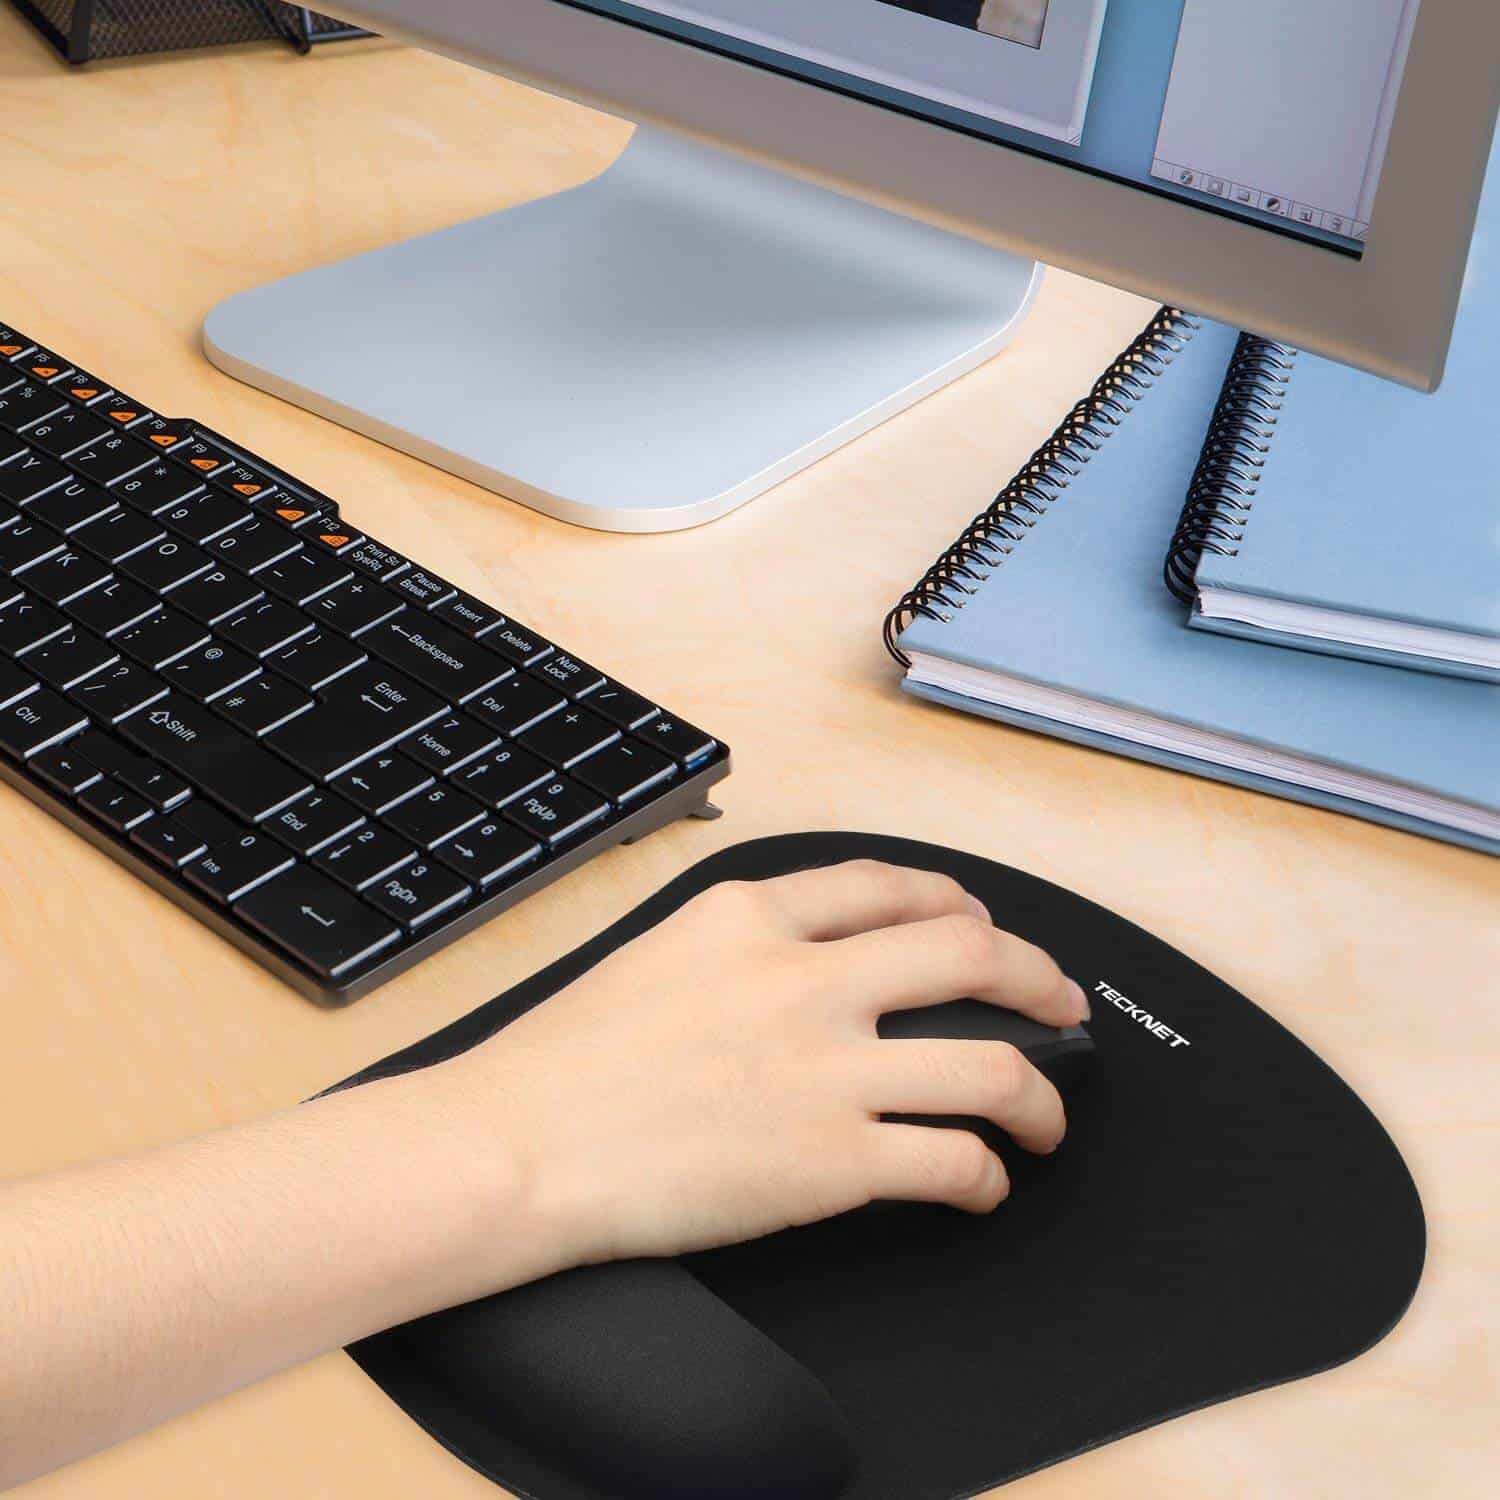 Using a mouse with a wrist rest